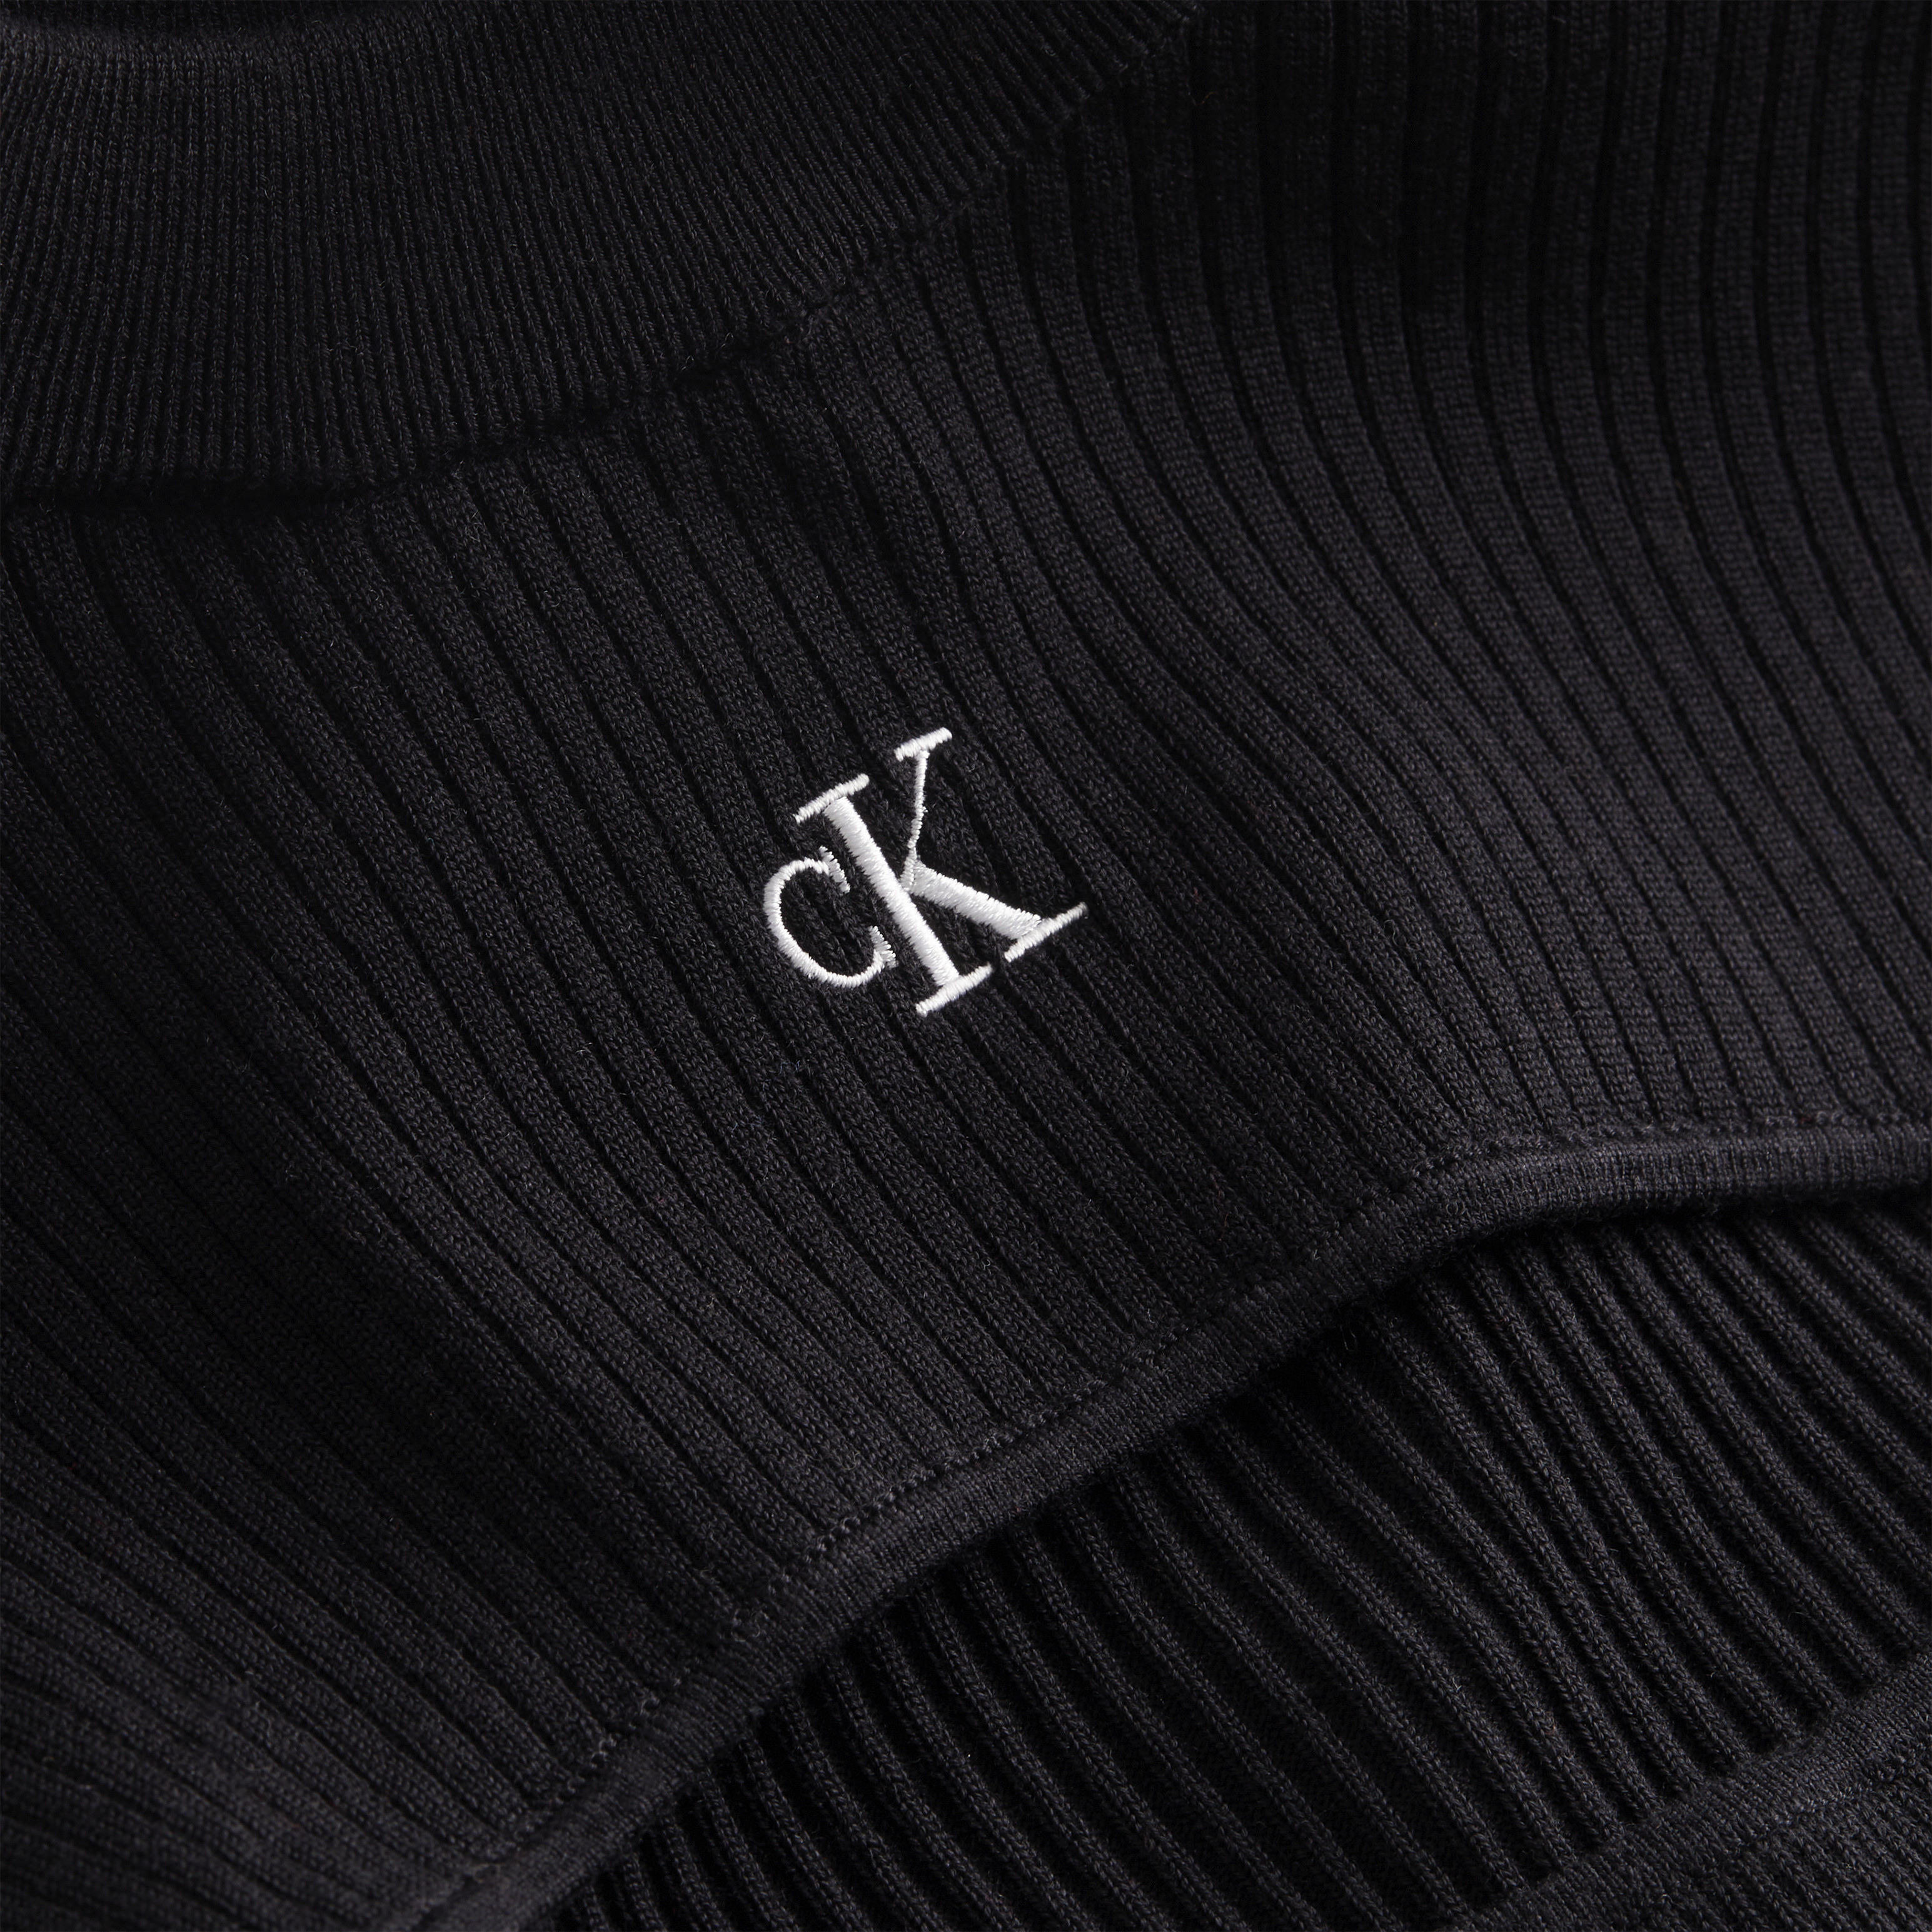 Calvin Klein Jeans - Crop sweater with cut out effect, Black, large image number 2